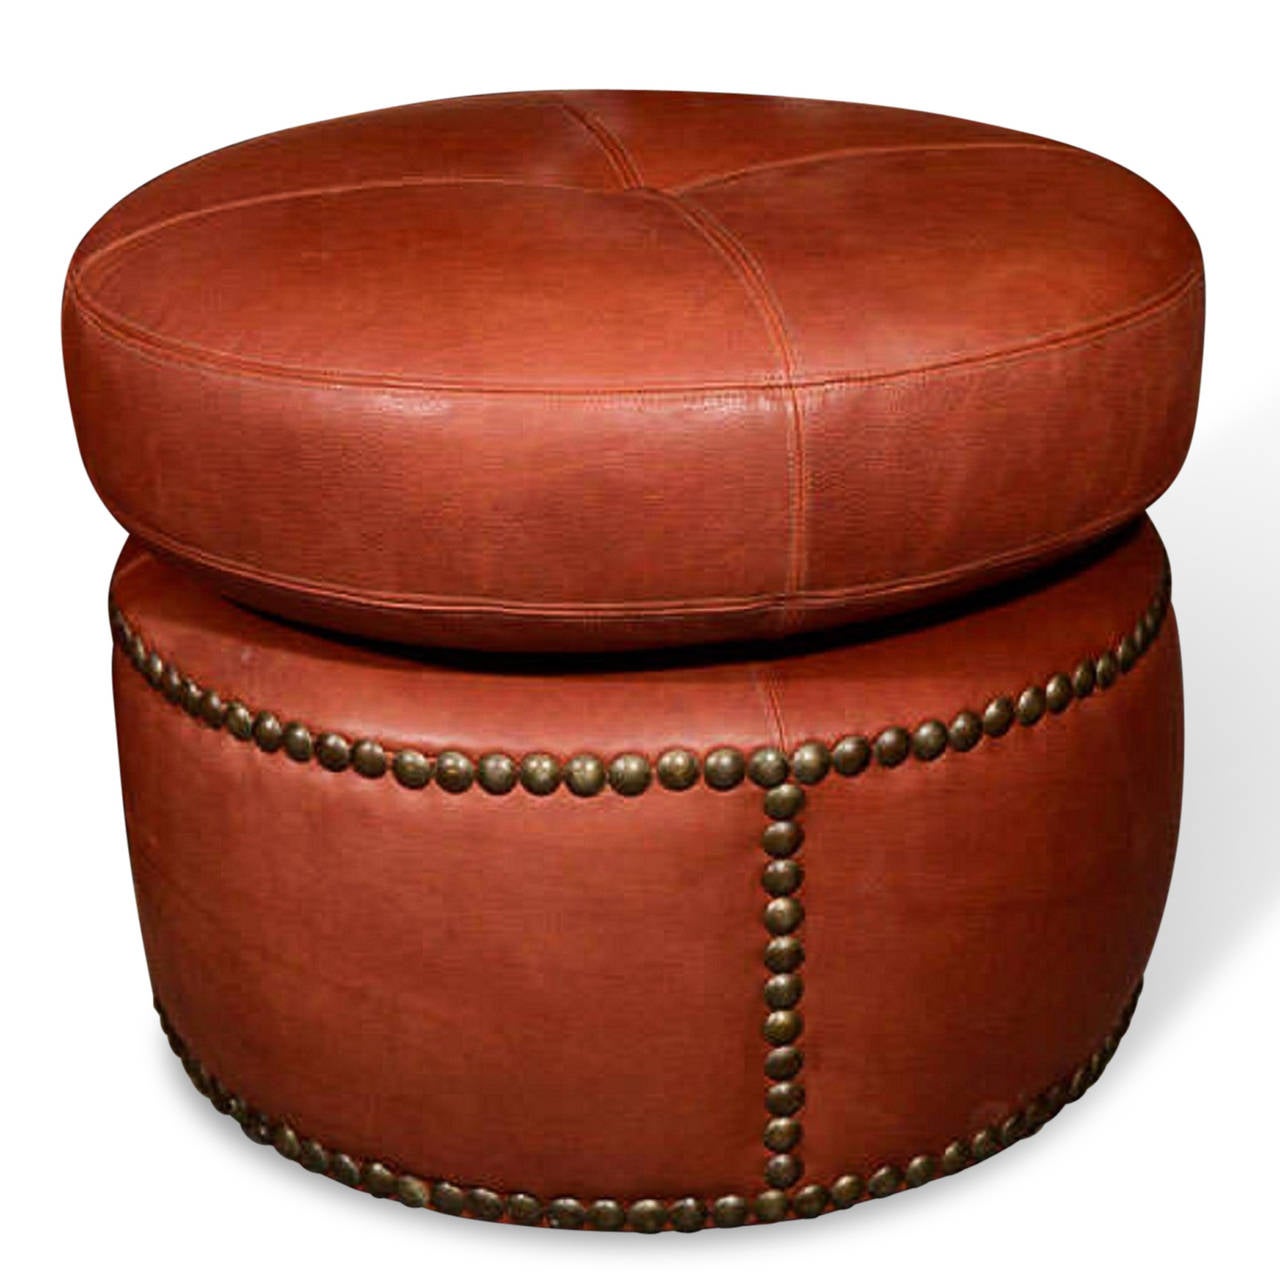 Pair of Leather Studded Poufs, French, 1920s In Excellent Condition For Sale In Hoboken, NJ